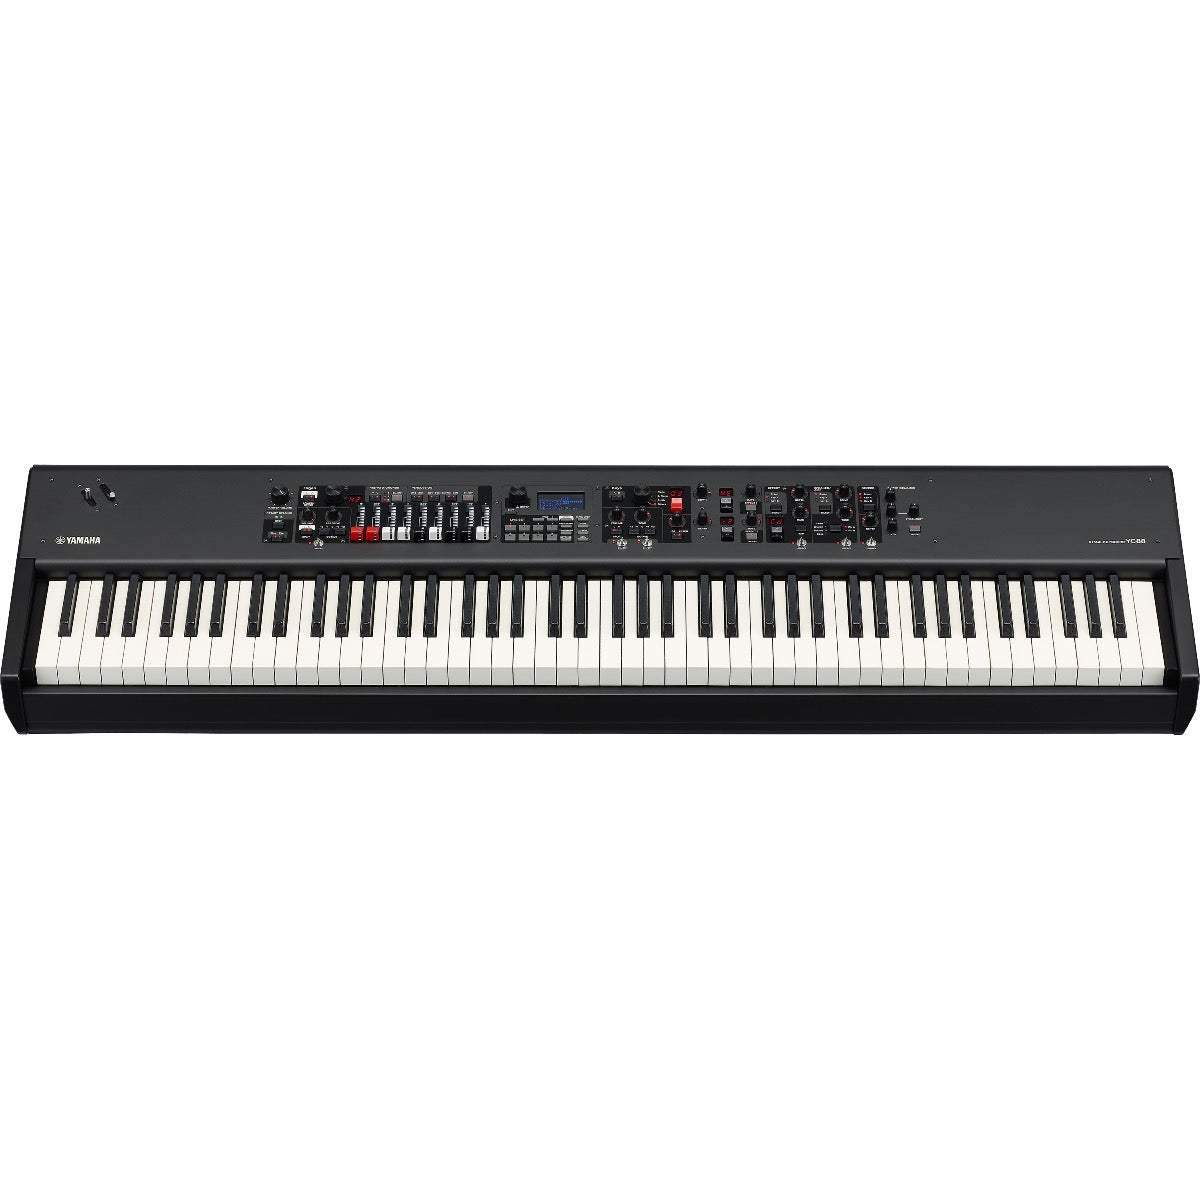 Perspective view of Yamaha YC88 88-Key Stage Keyboard and Organ showing top and front